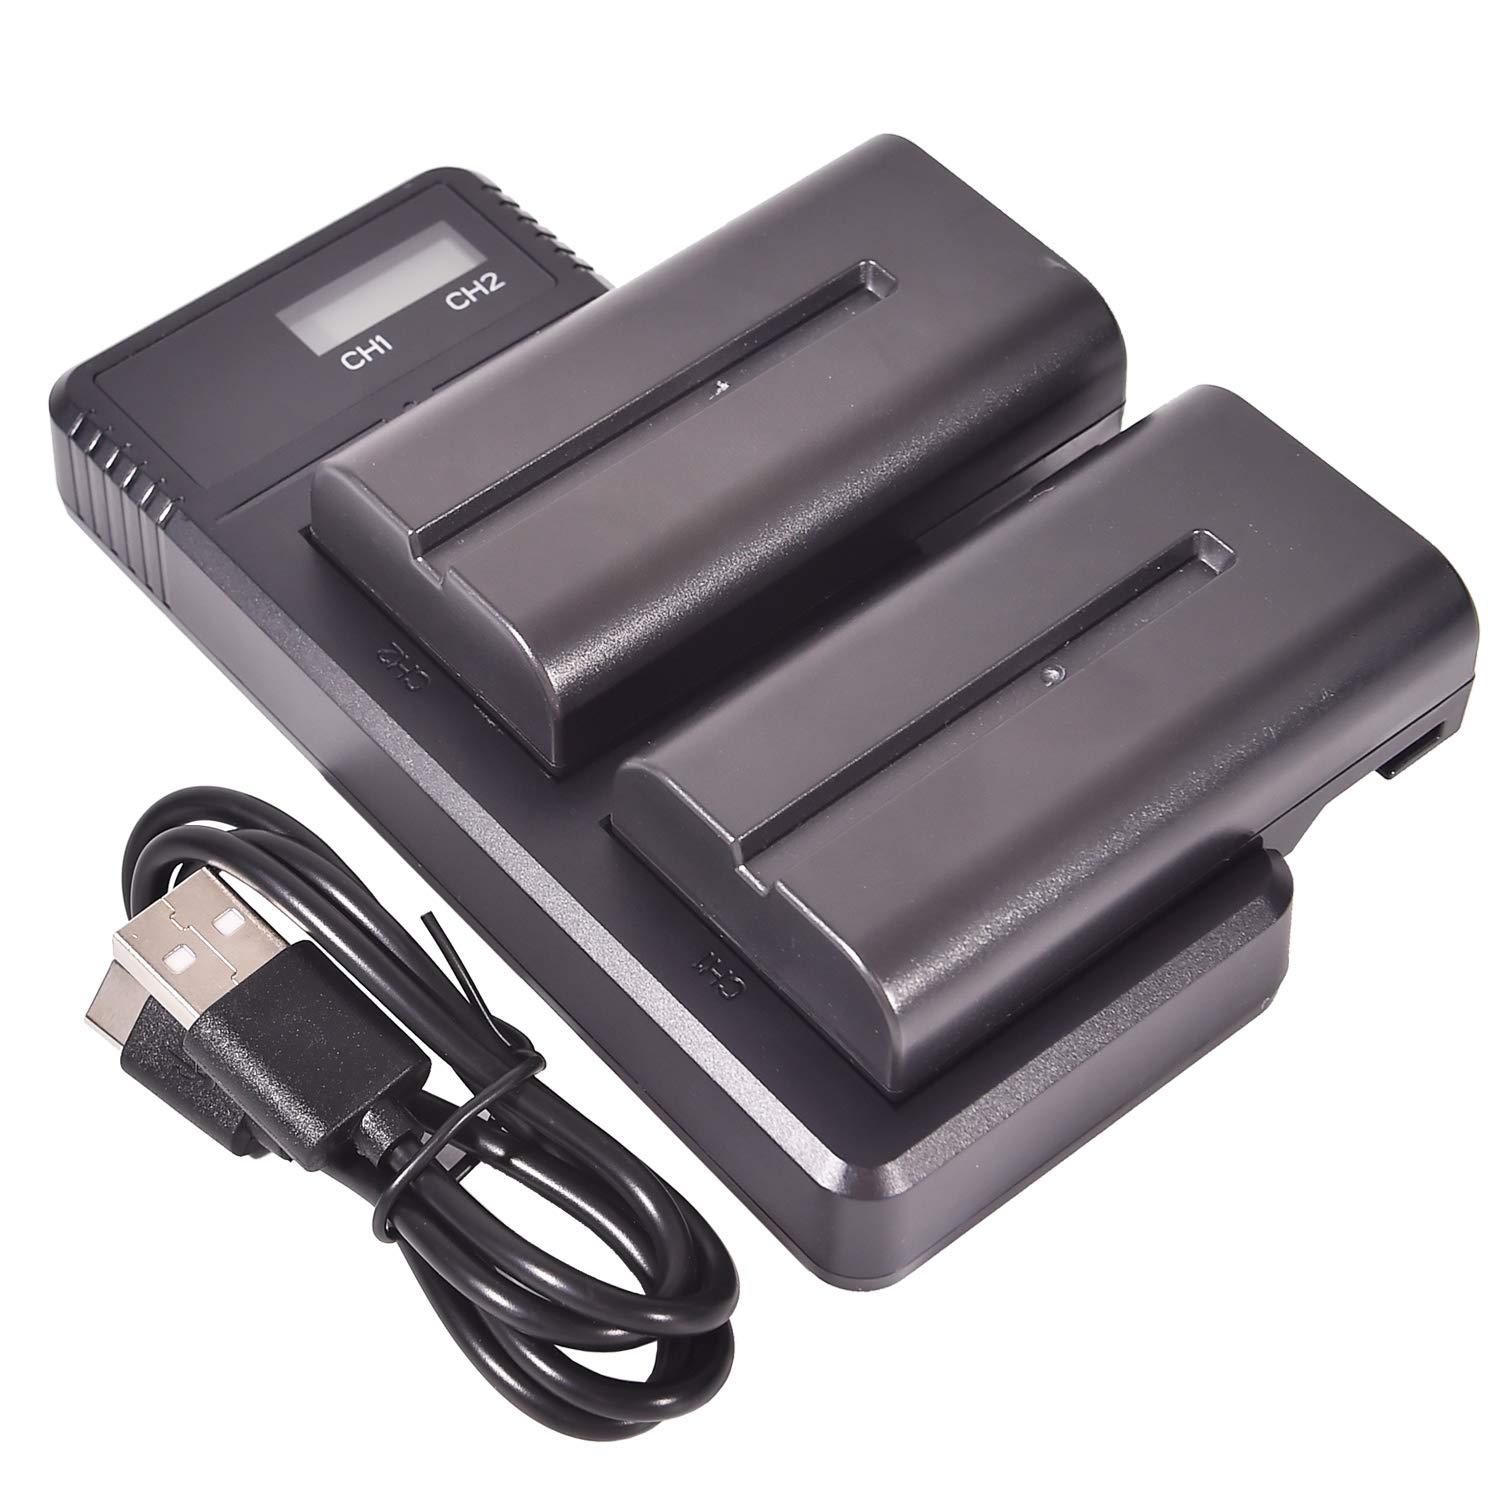 Dste 2X Np-F550 Battery + Rapid Dual Lcd Charger Compatible With Ccd-R